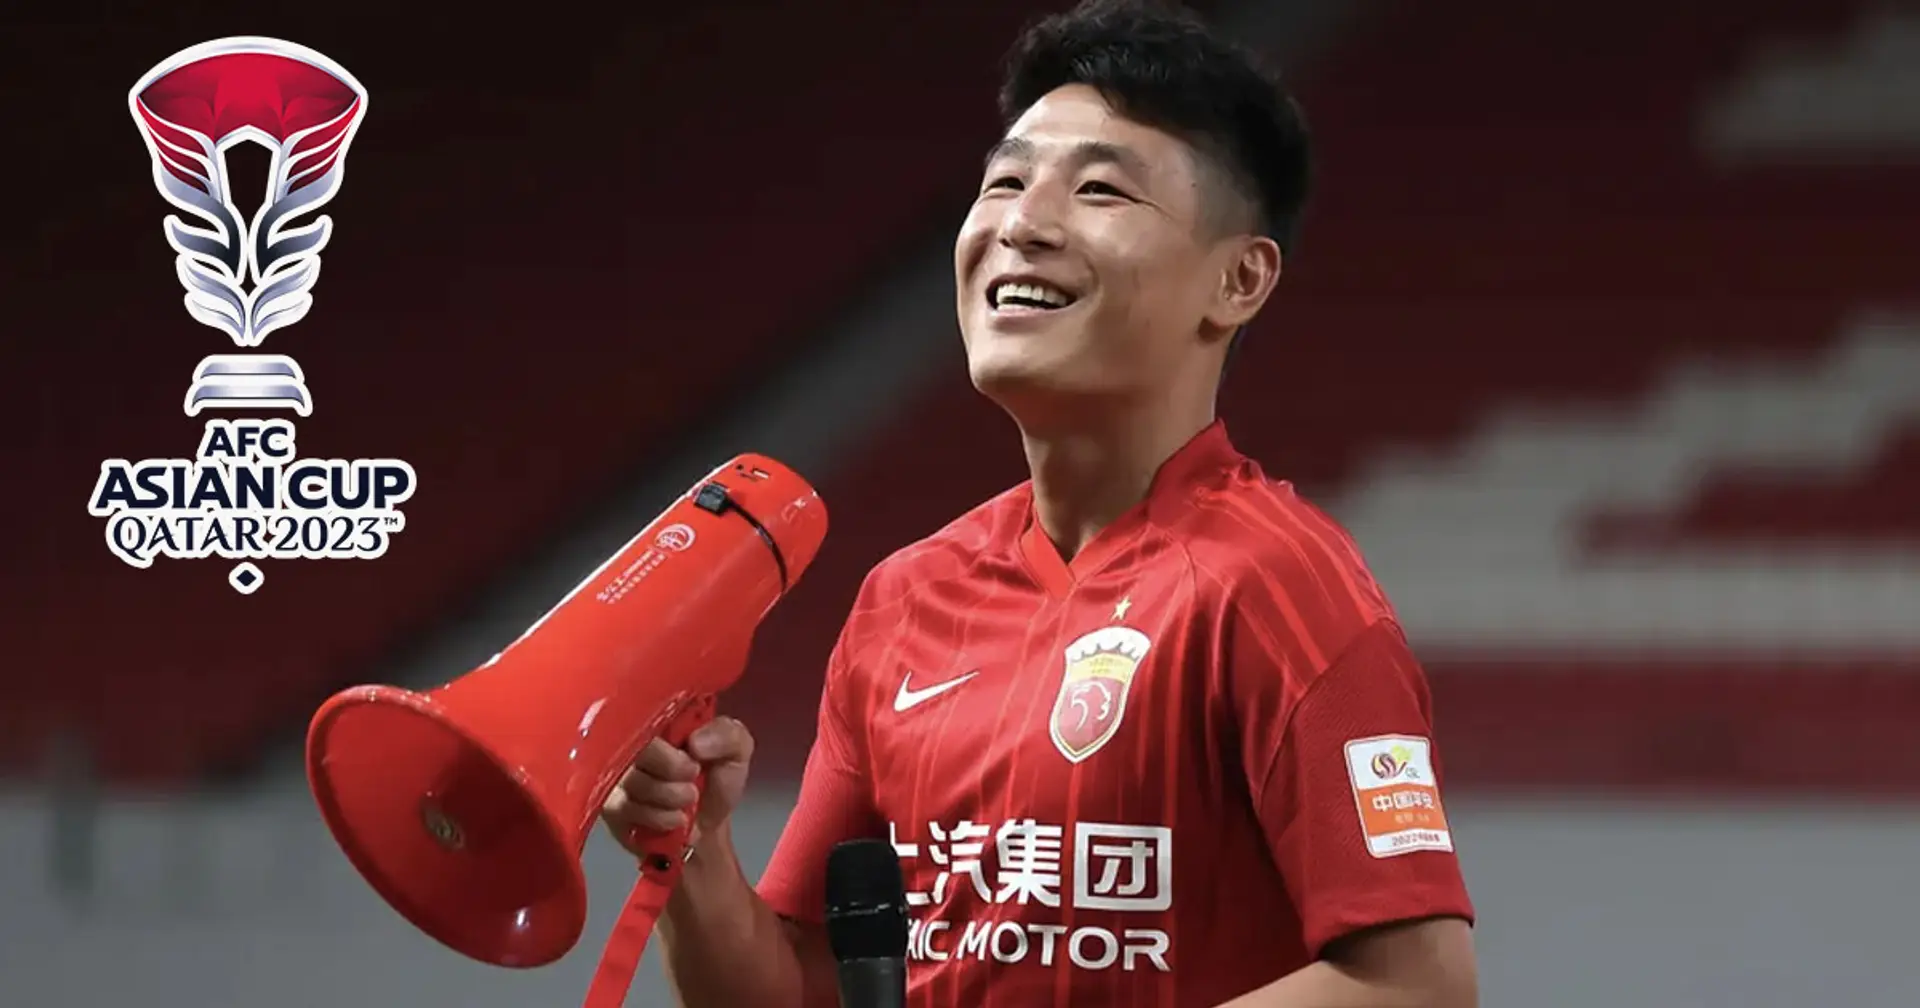 Will Qatar keep a clean sheet against China? Bookies tip Chinese Muslim winger as only proper threat